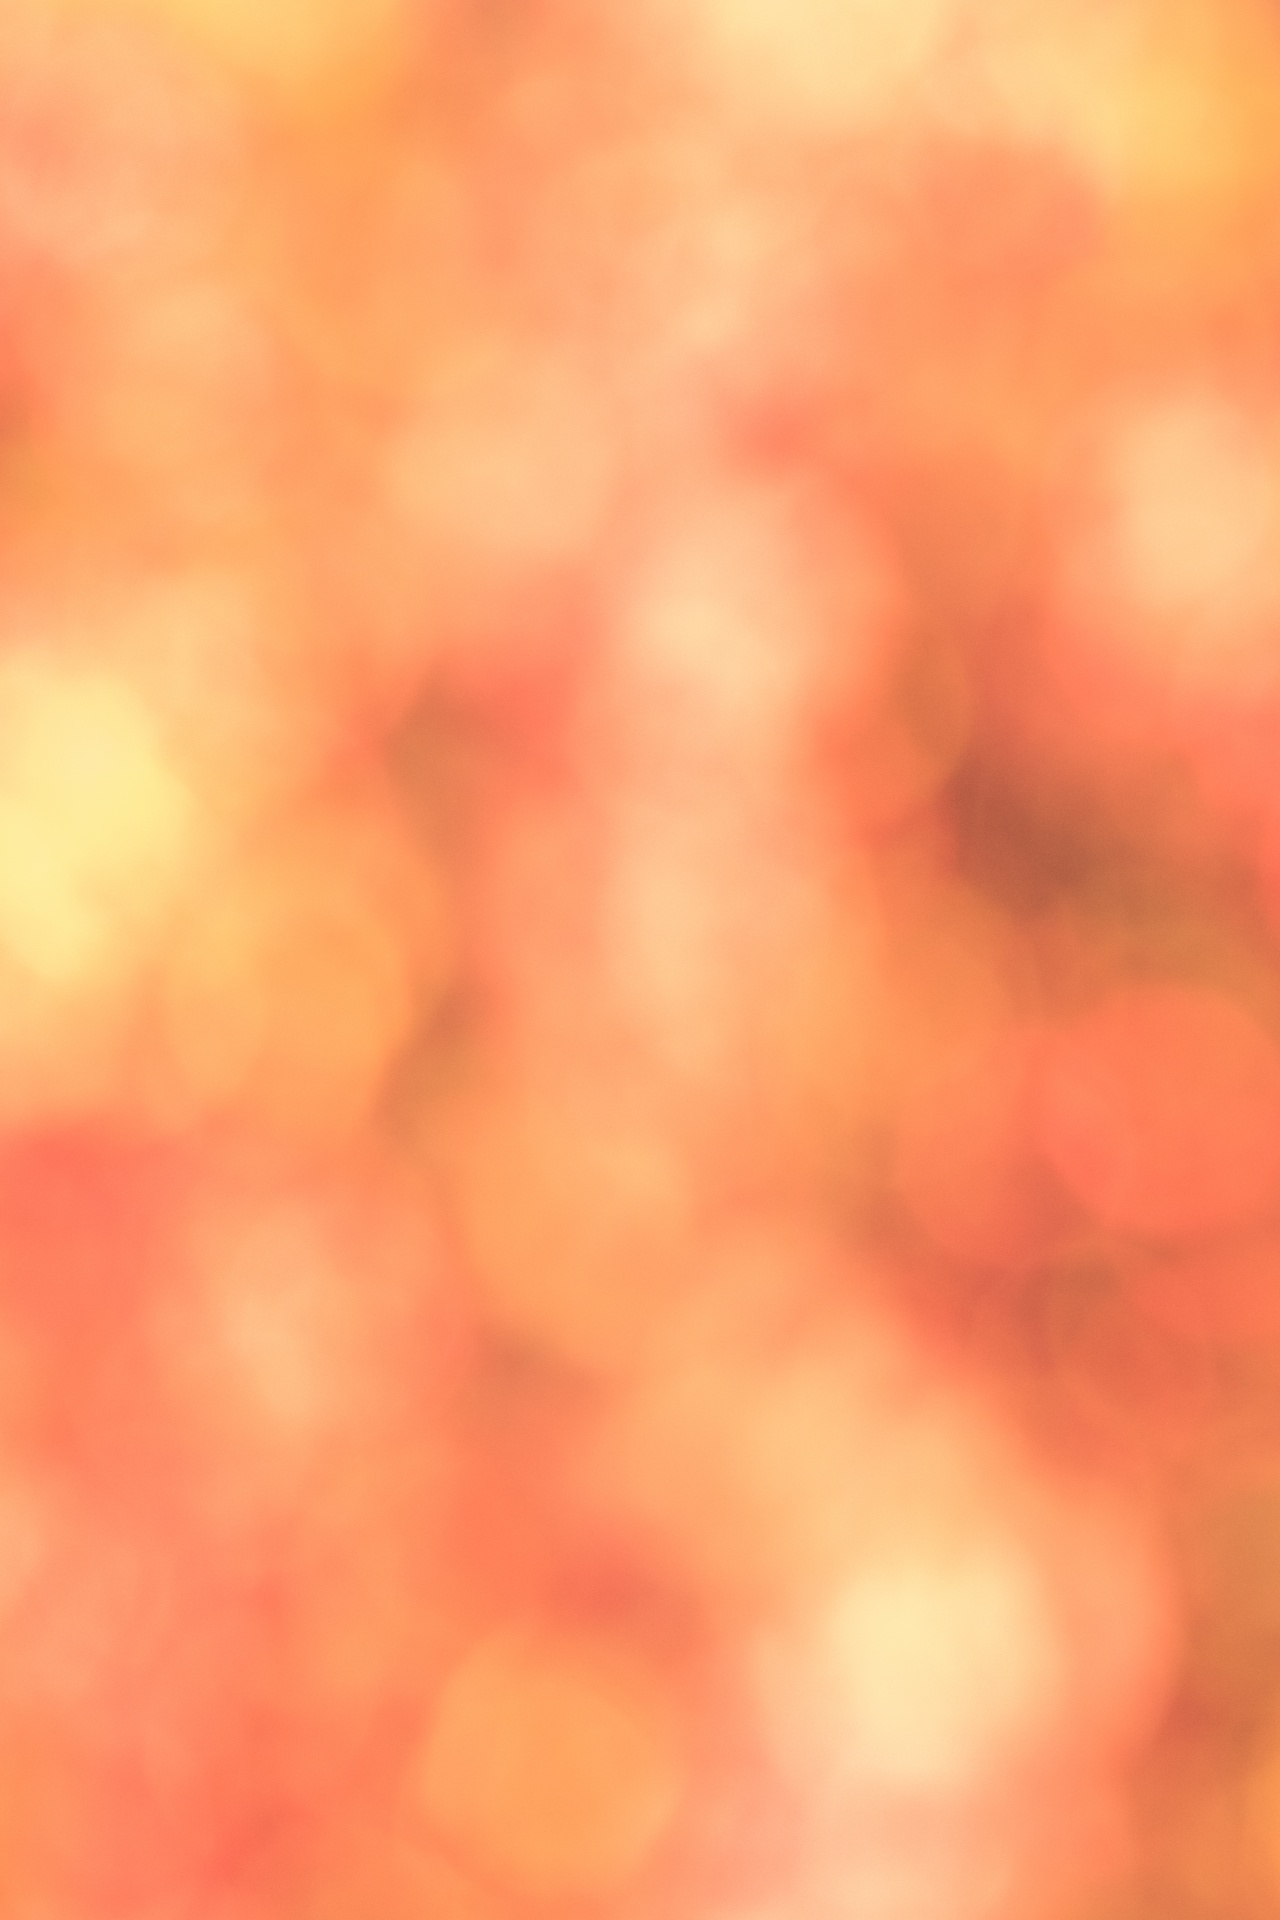 Download free photo of Abstract, autumn, backdrop, background, blur